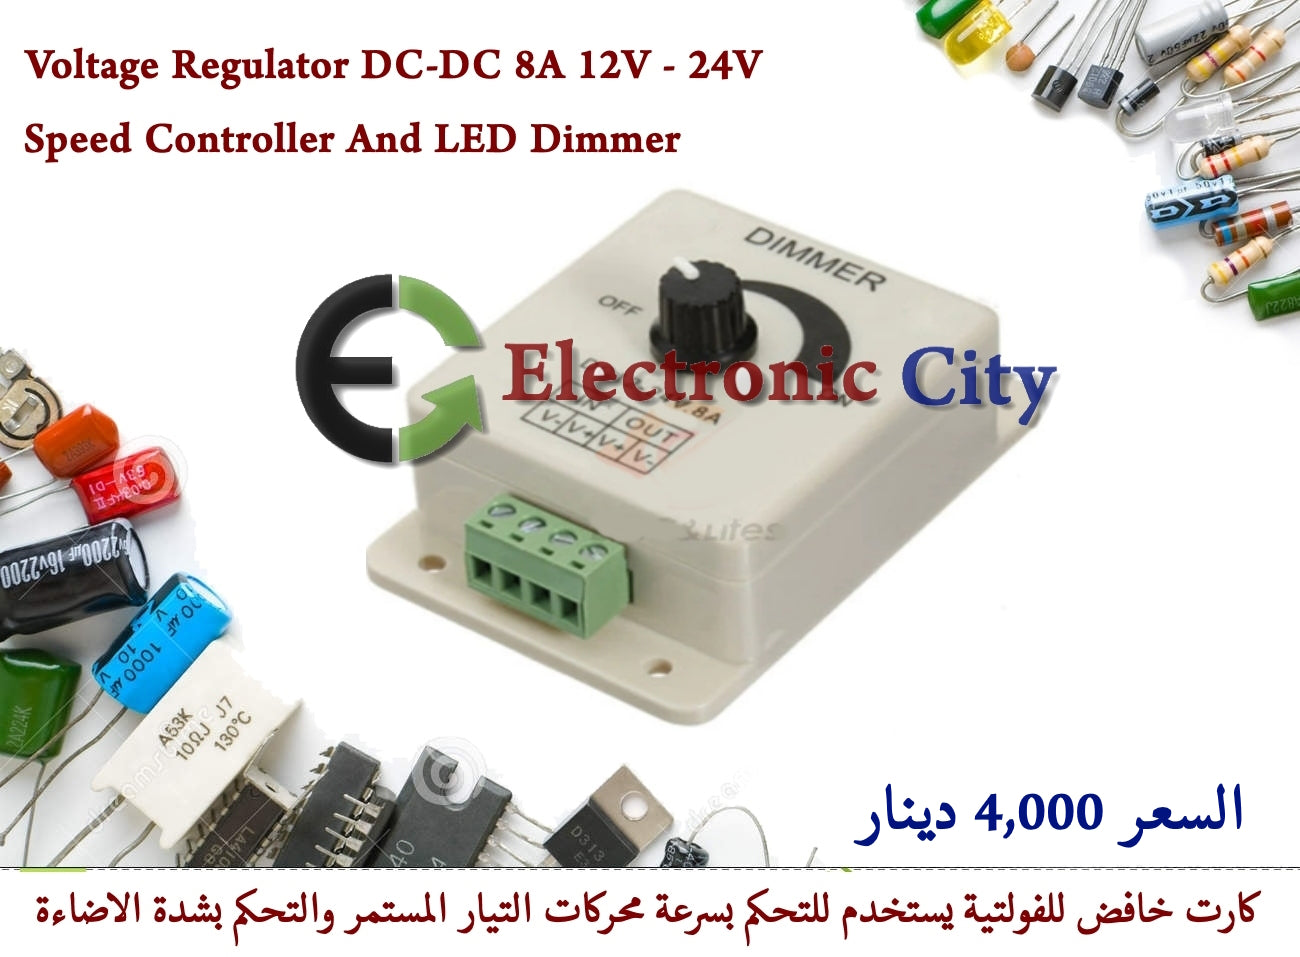 Voltage Regulator DC-DC 8A Power Supply Adjustable Speed Controller And LED Dimmer #O 10 050147